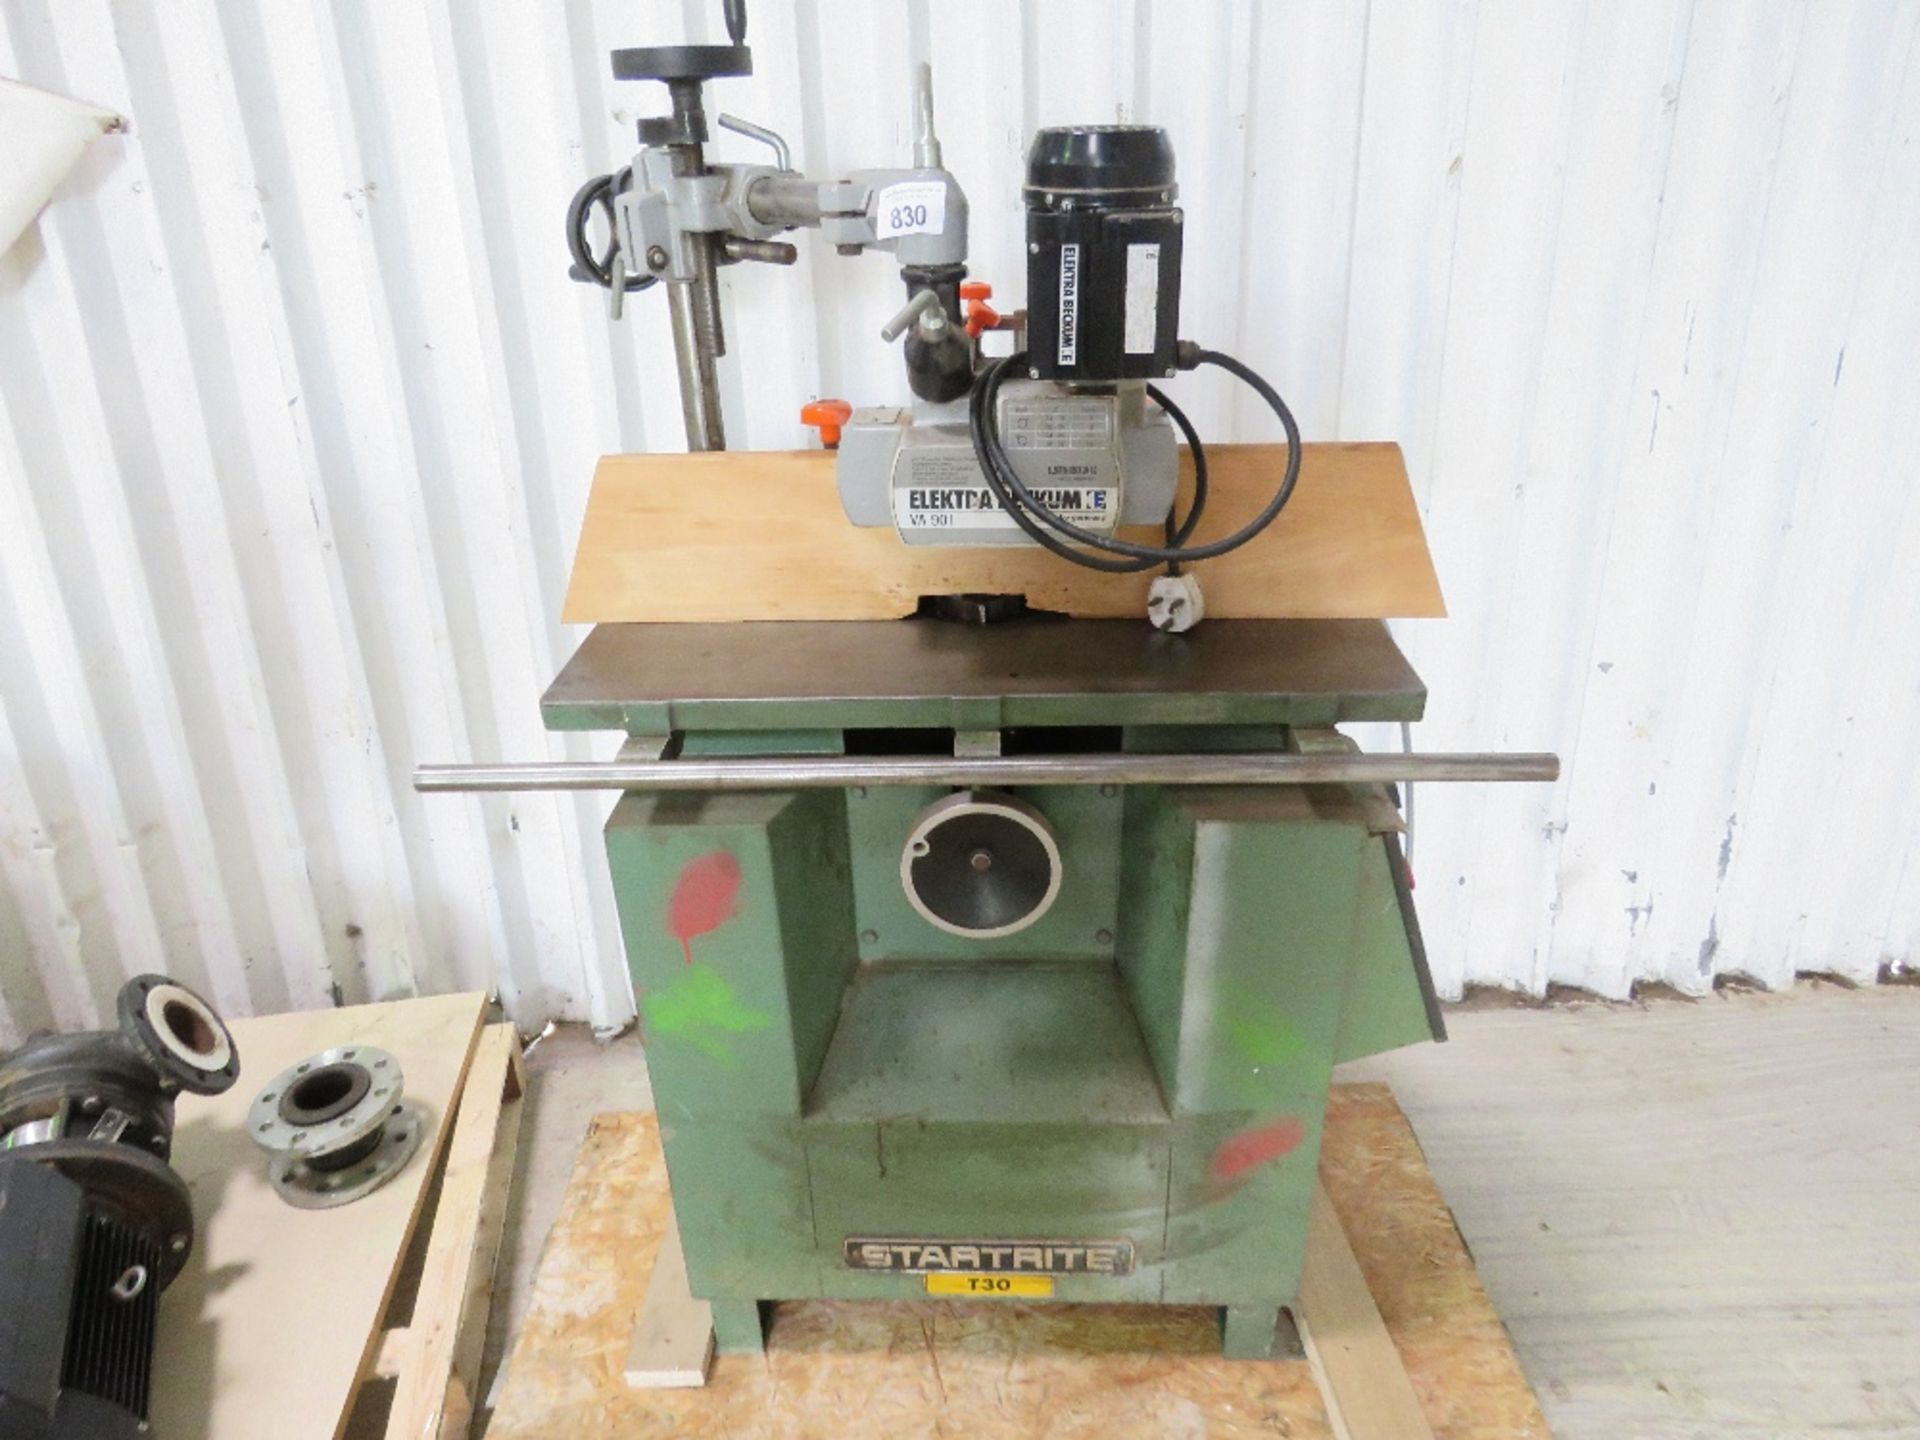 STARTRITE T30 SPINDLE MOULDER UNIT WITH 240VOLT POWERED FEED HEAD, MAIN UNIT IS 3 PHASE POWERED.....